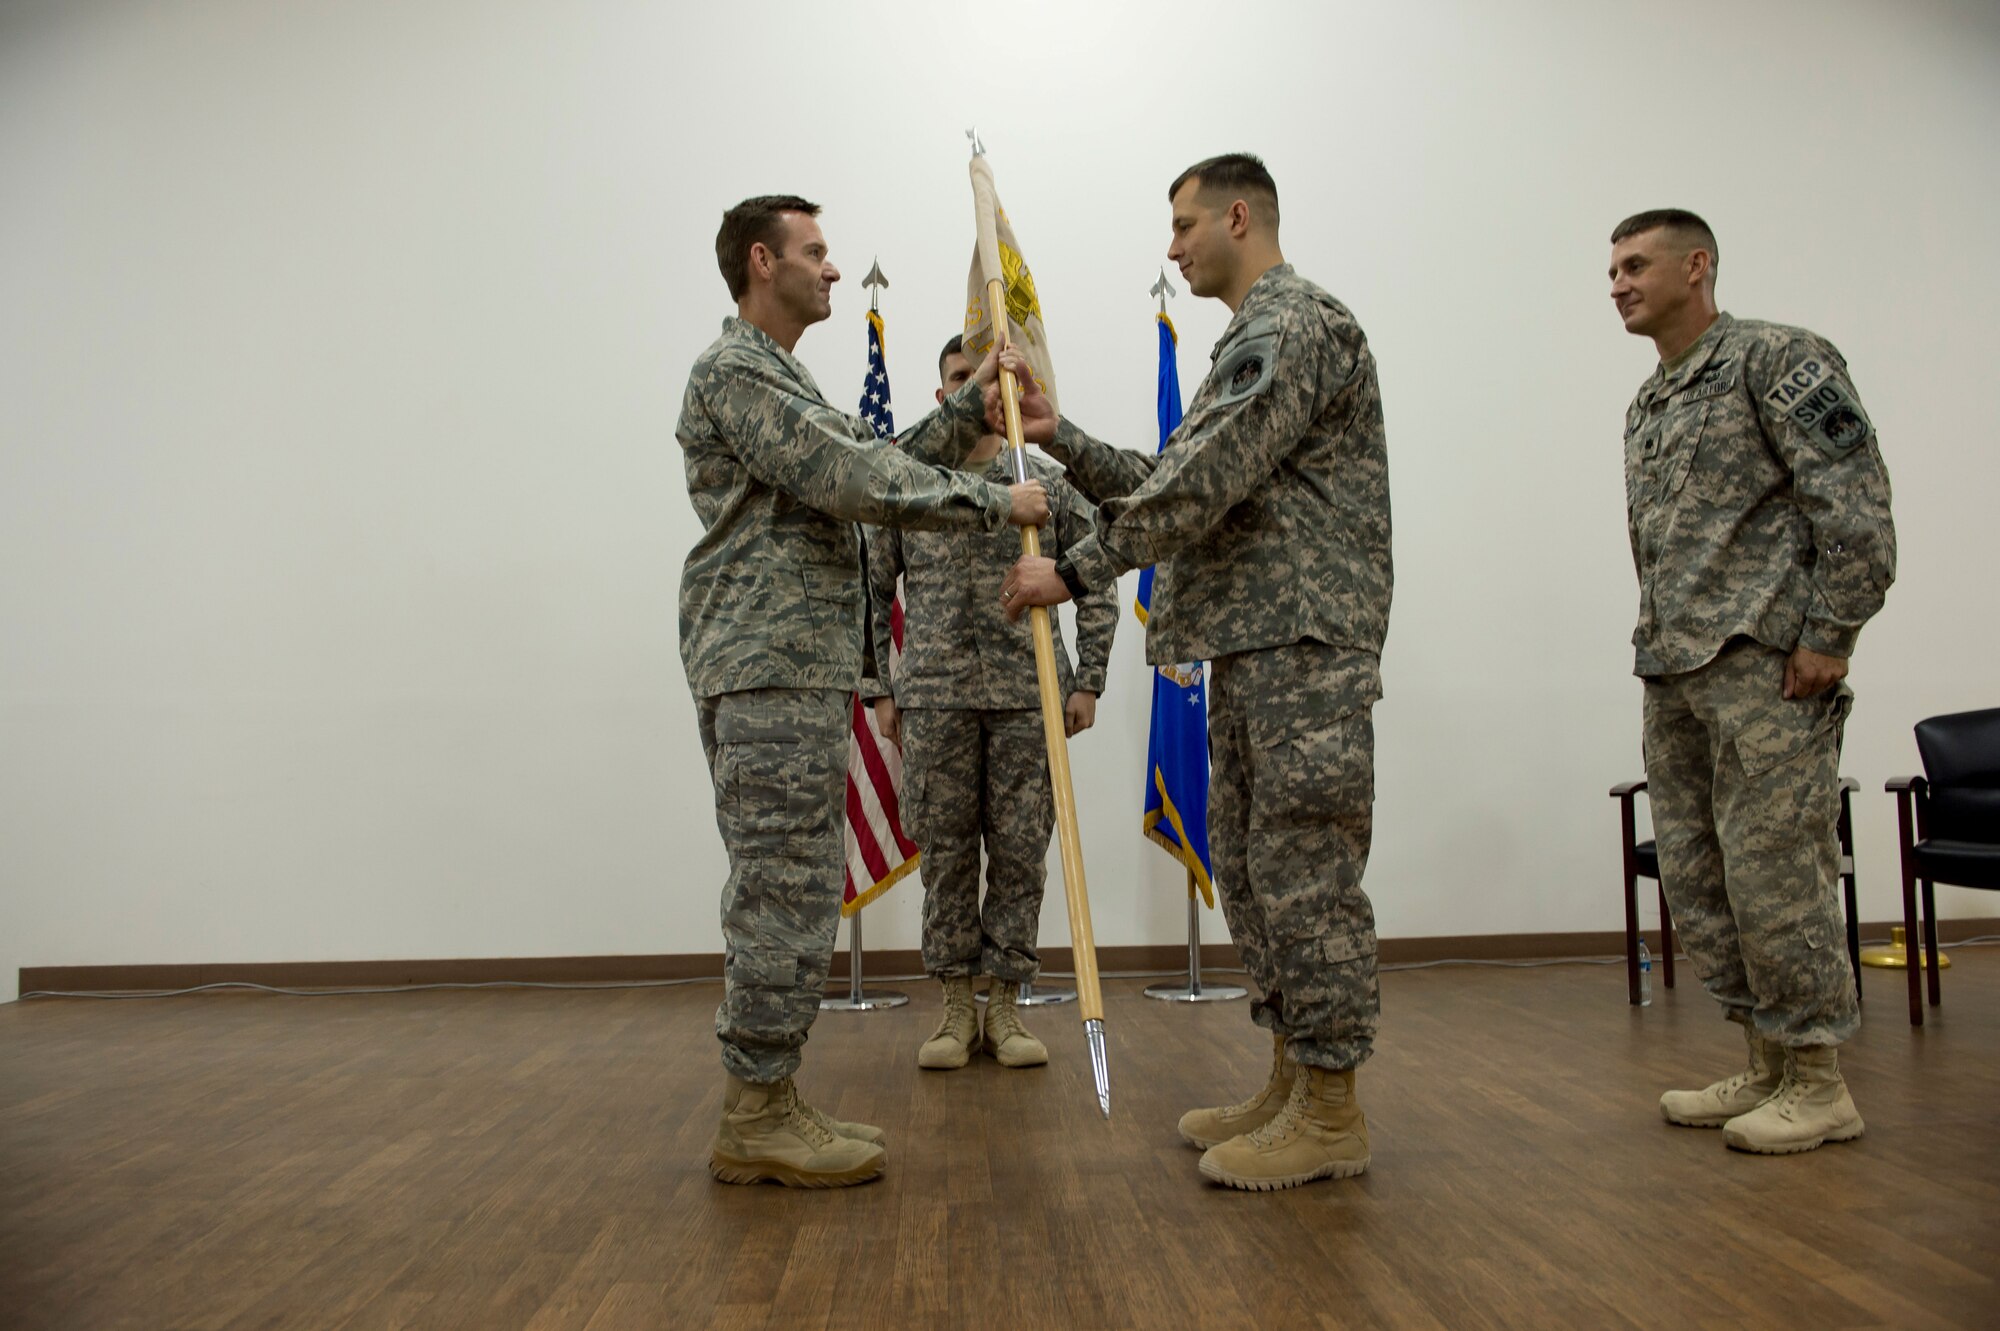 U.S. Air Force Col. Timothy Gosnell, 380th Expeditionary Operations Group commander, presents Lt. Col. Mark Johnson with the 82nd Expeditionary Air Support Operations Squadron guidon on May 3, 2014 at an undisclosed location is Southwest Asia. The passing of the guidon signifies Johnson’s official assumption of command. (U.S. Air Force photo by Staff Sgt. Jeremy Bowcock)